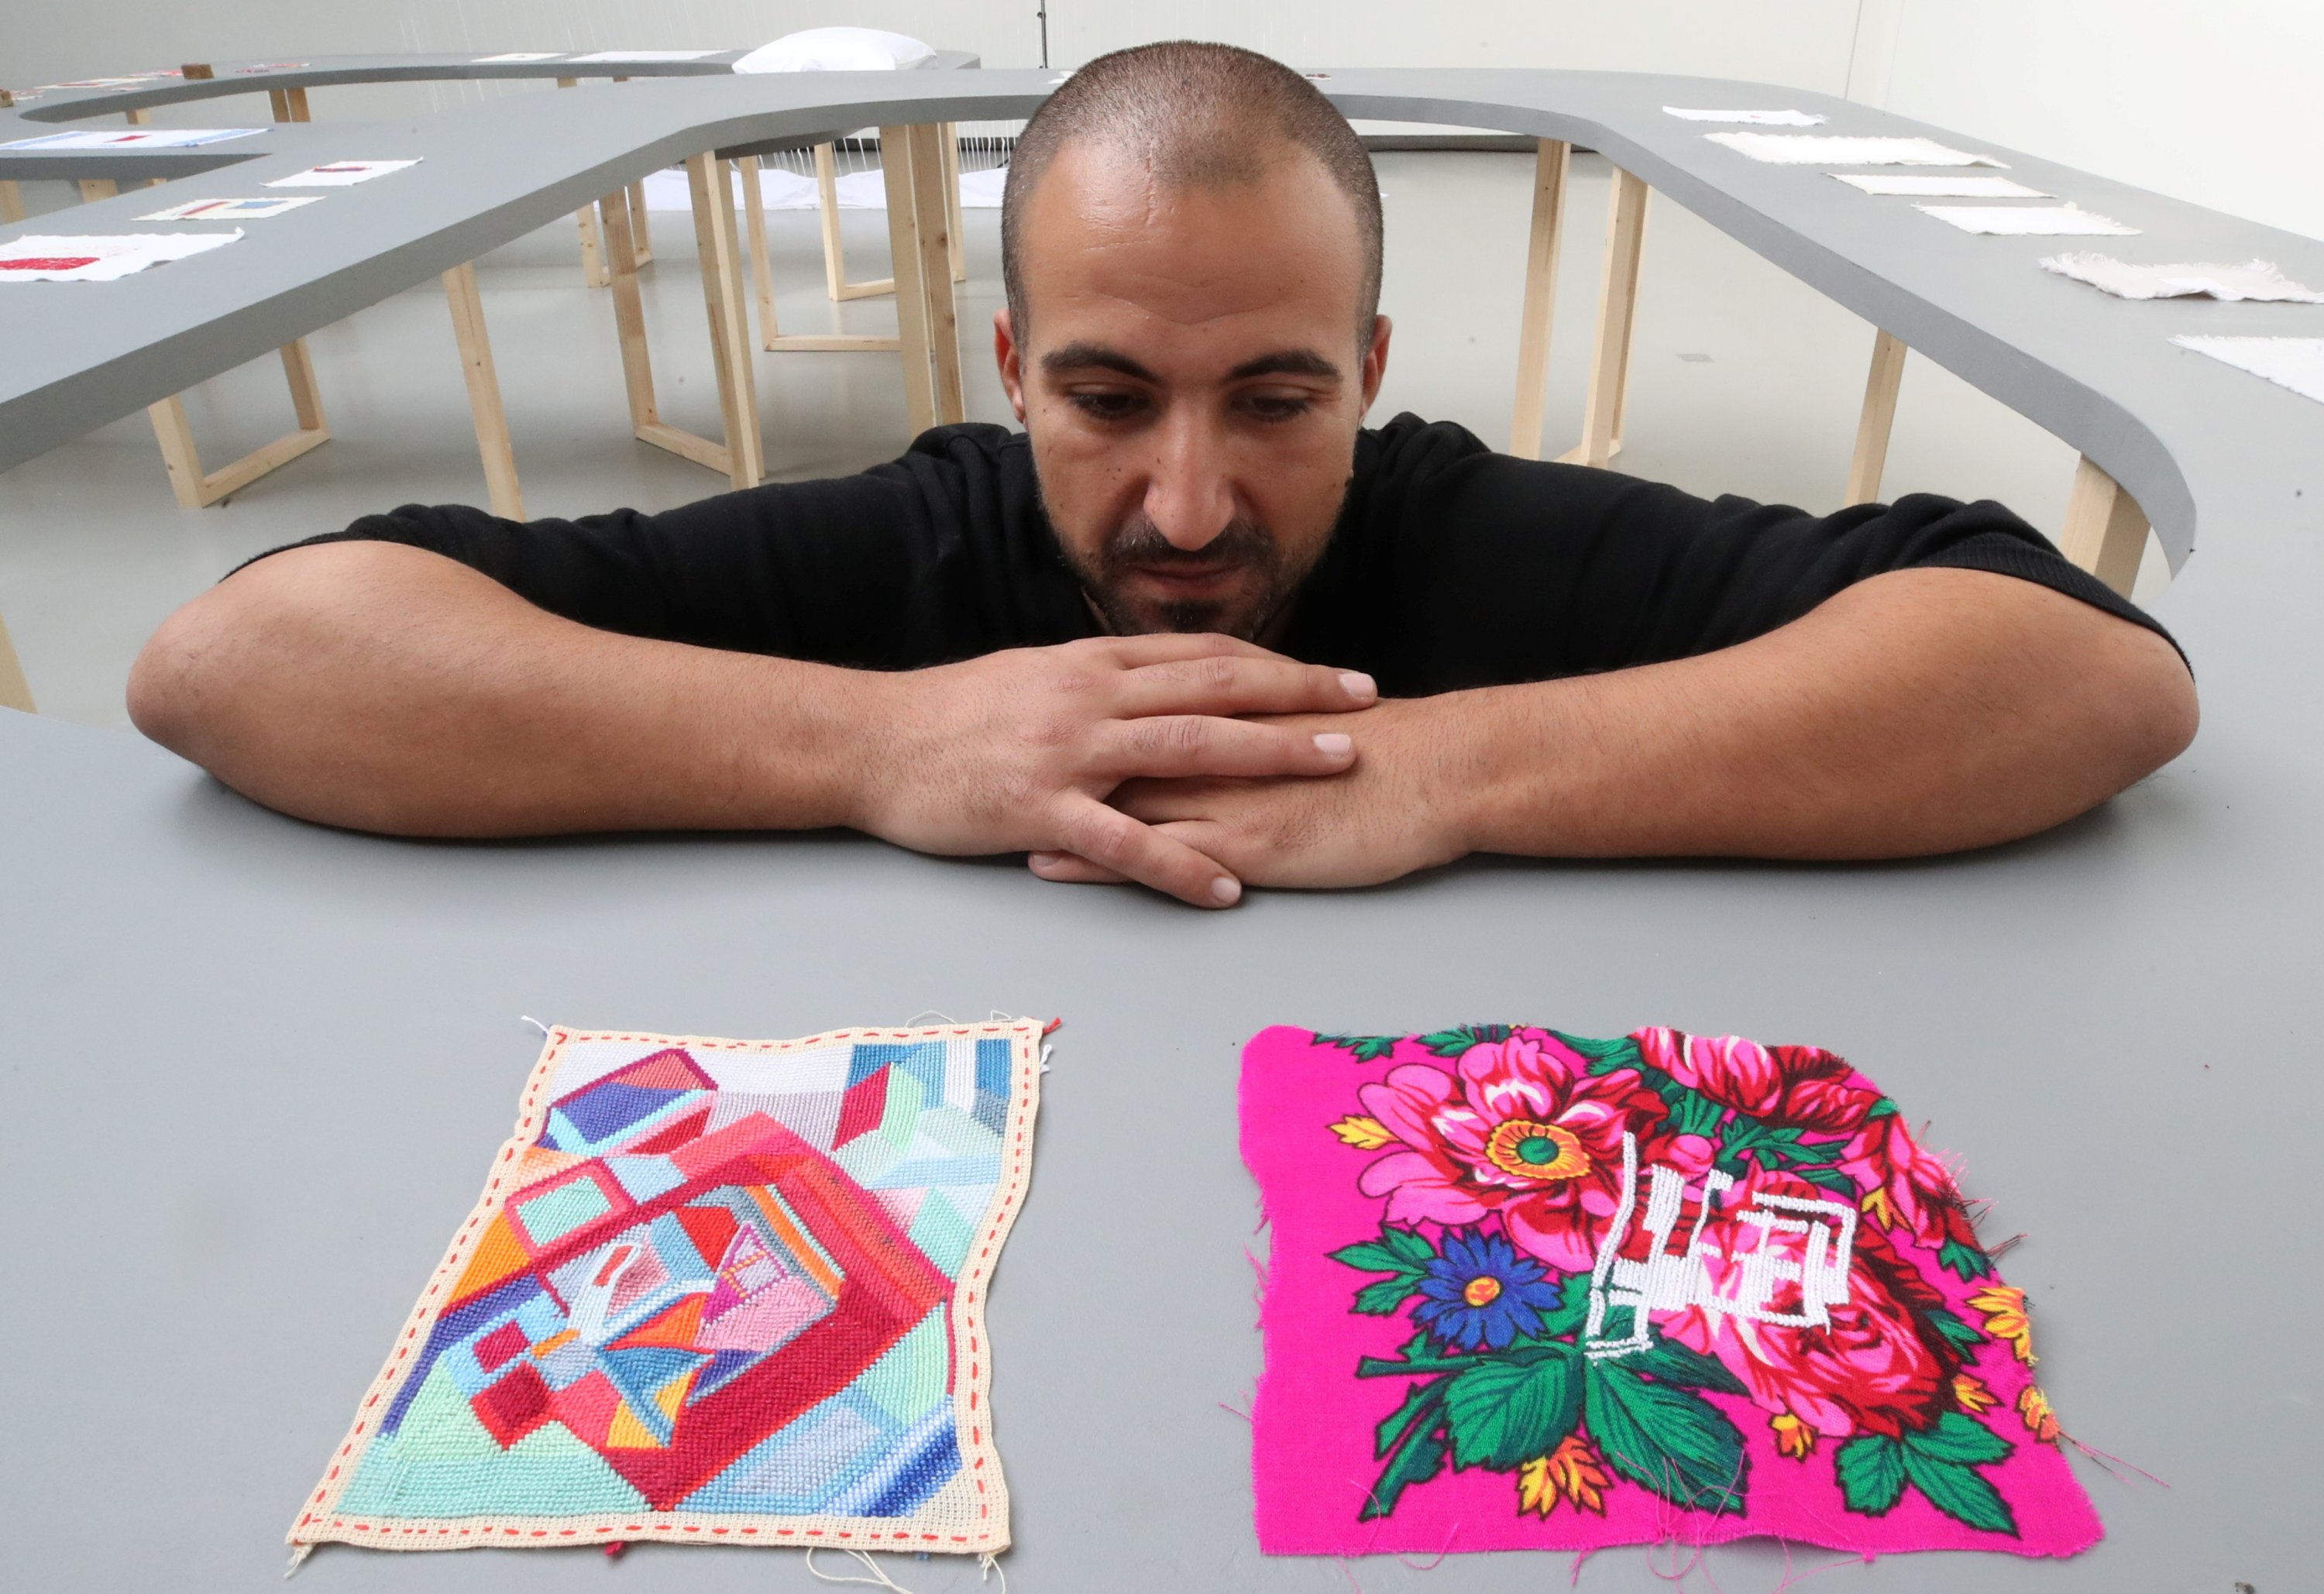 Palestinian artist Majd Abdel Hamid poses for Reuters during his exhibition 